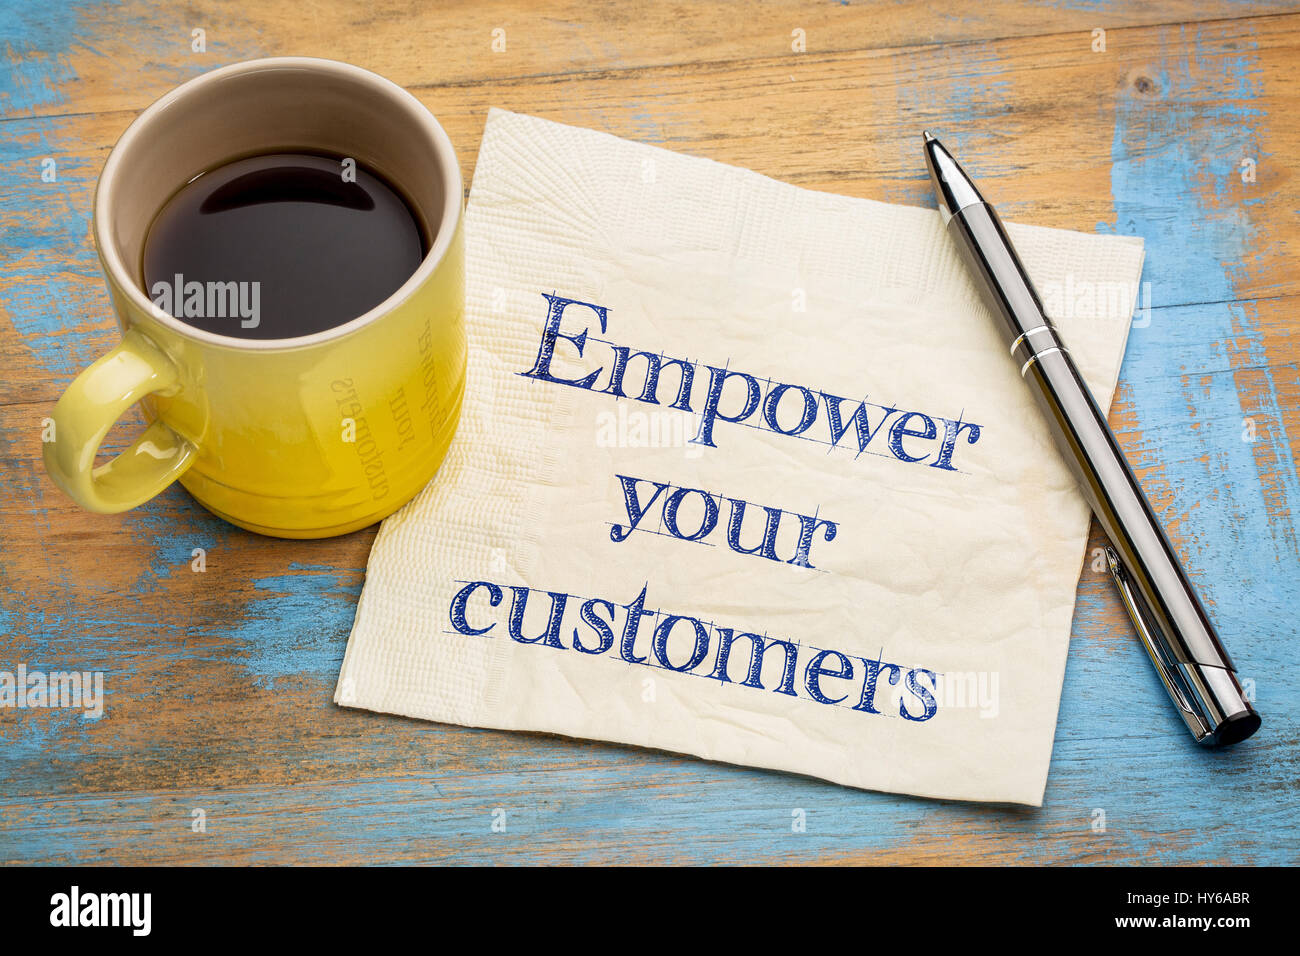 Empower your customers advice or reminder - handwriting on a napkin with a cup of espresso coffee Stock Photo